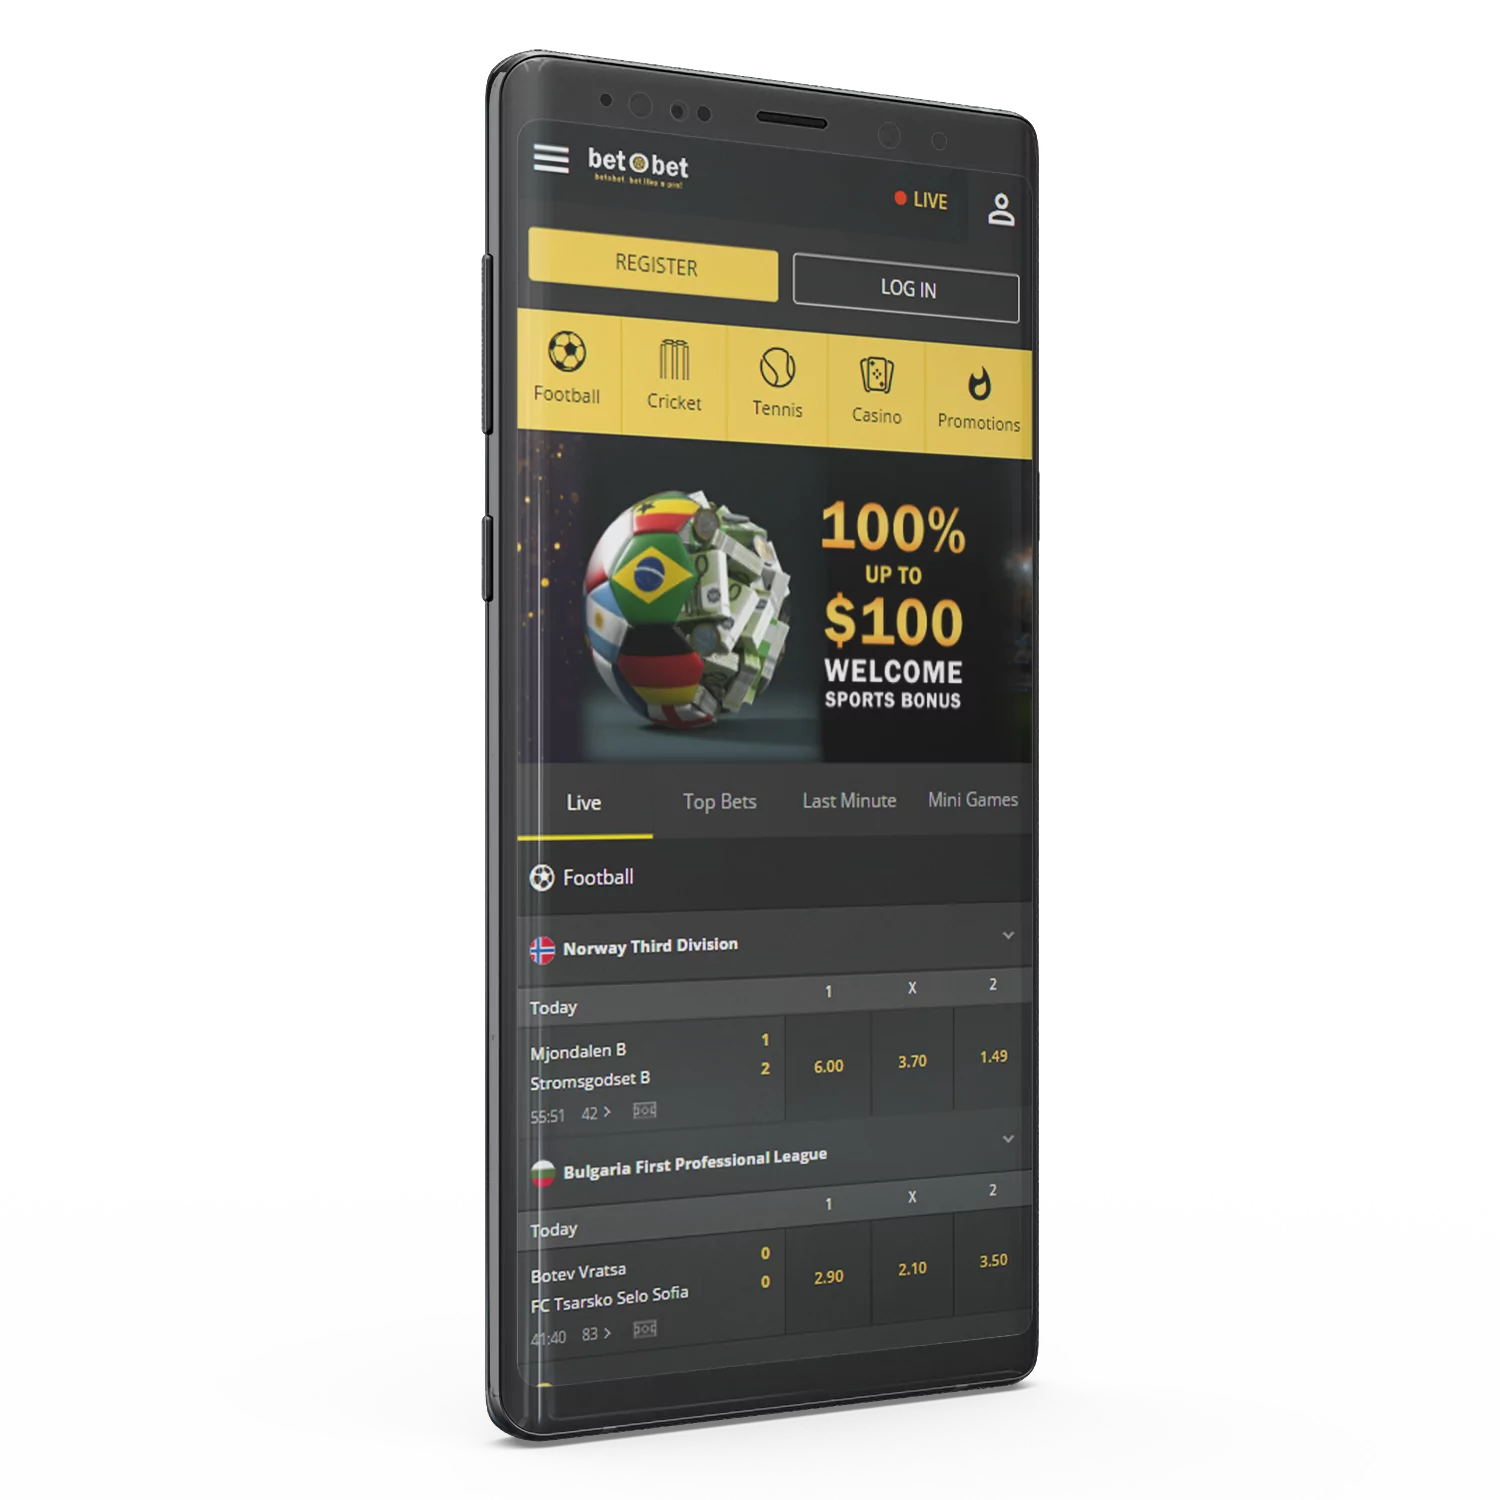 Betobet app is one of the new betting app on the online betting market.